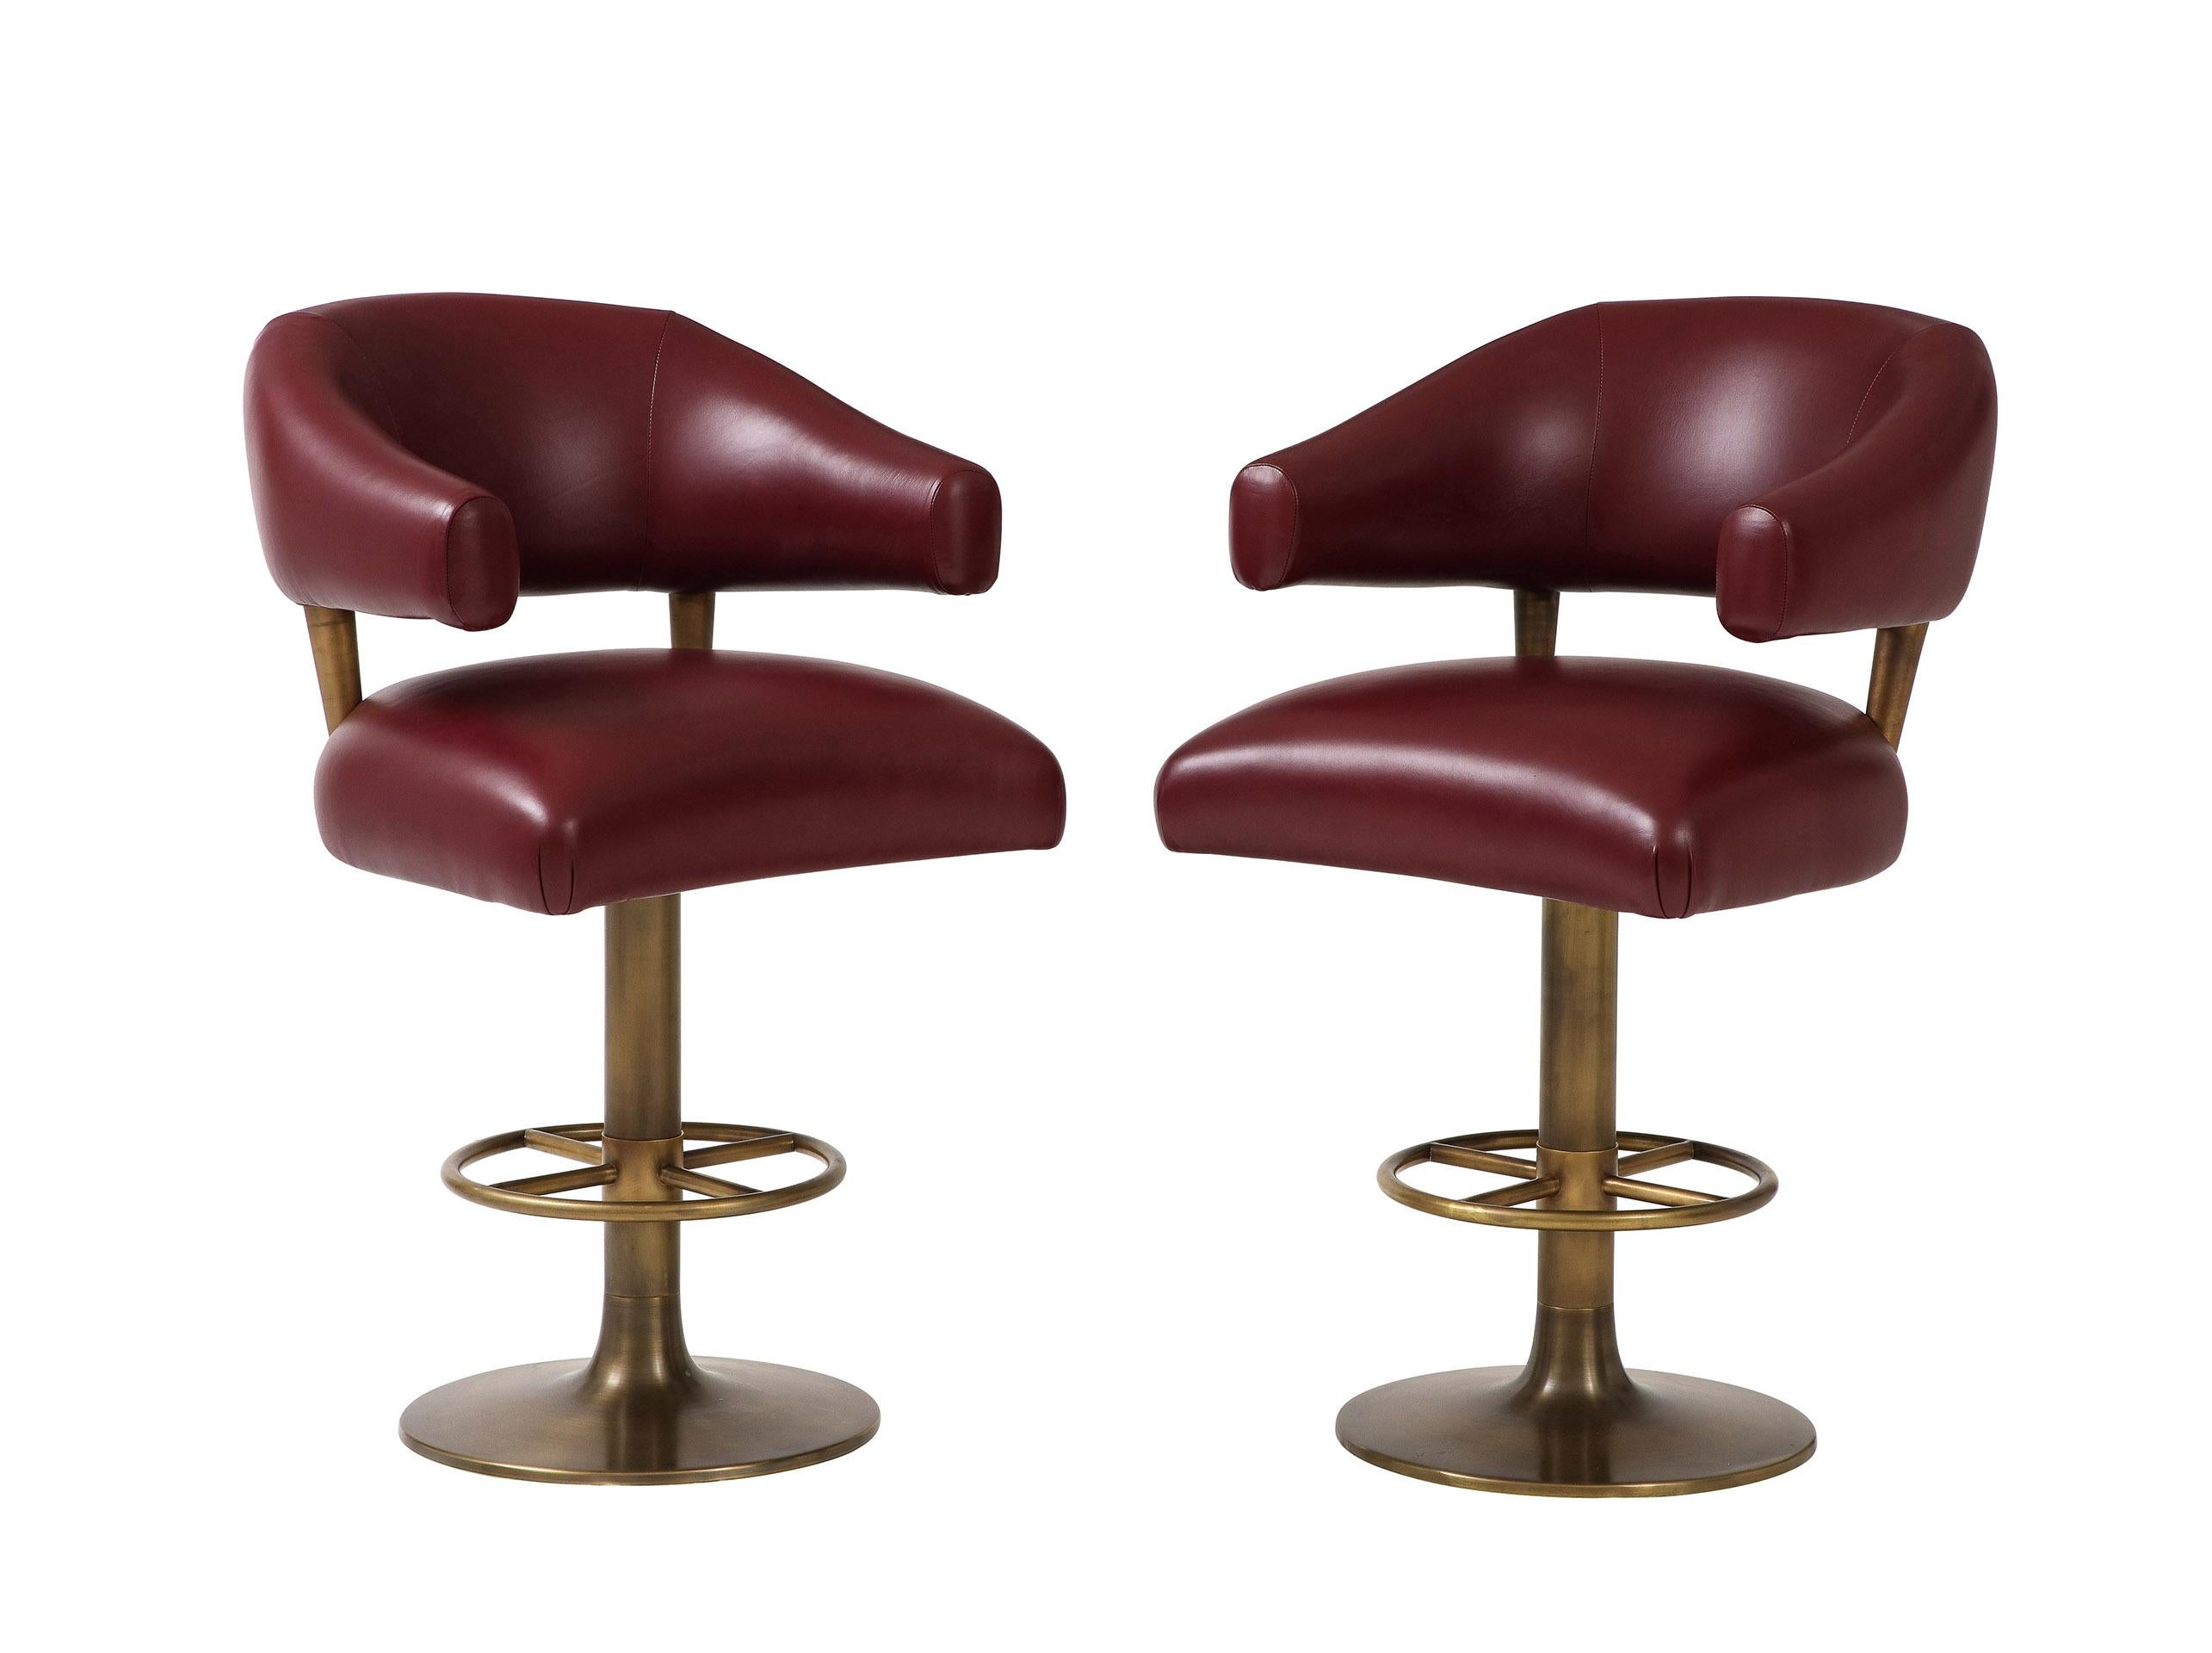 Set of 4 Leather & Brass Bar Stools In Good Condition For Sale In New York, NY